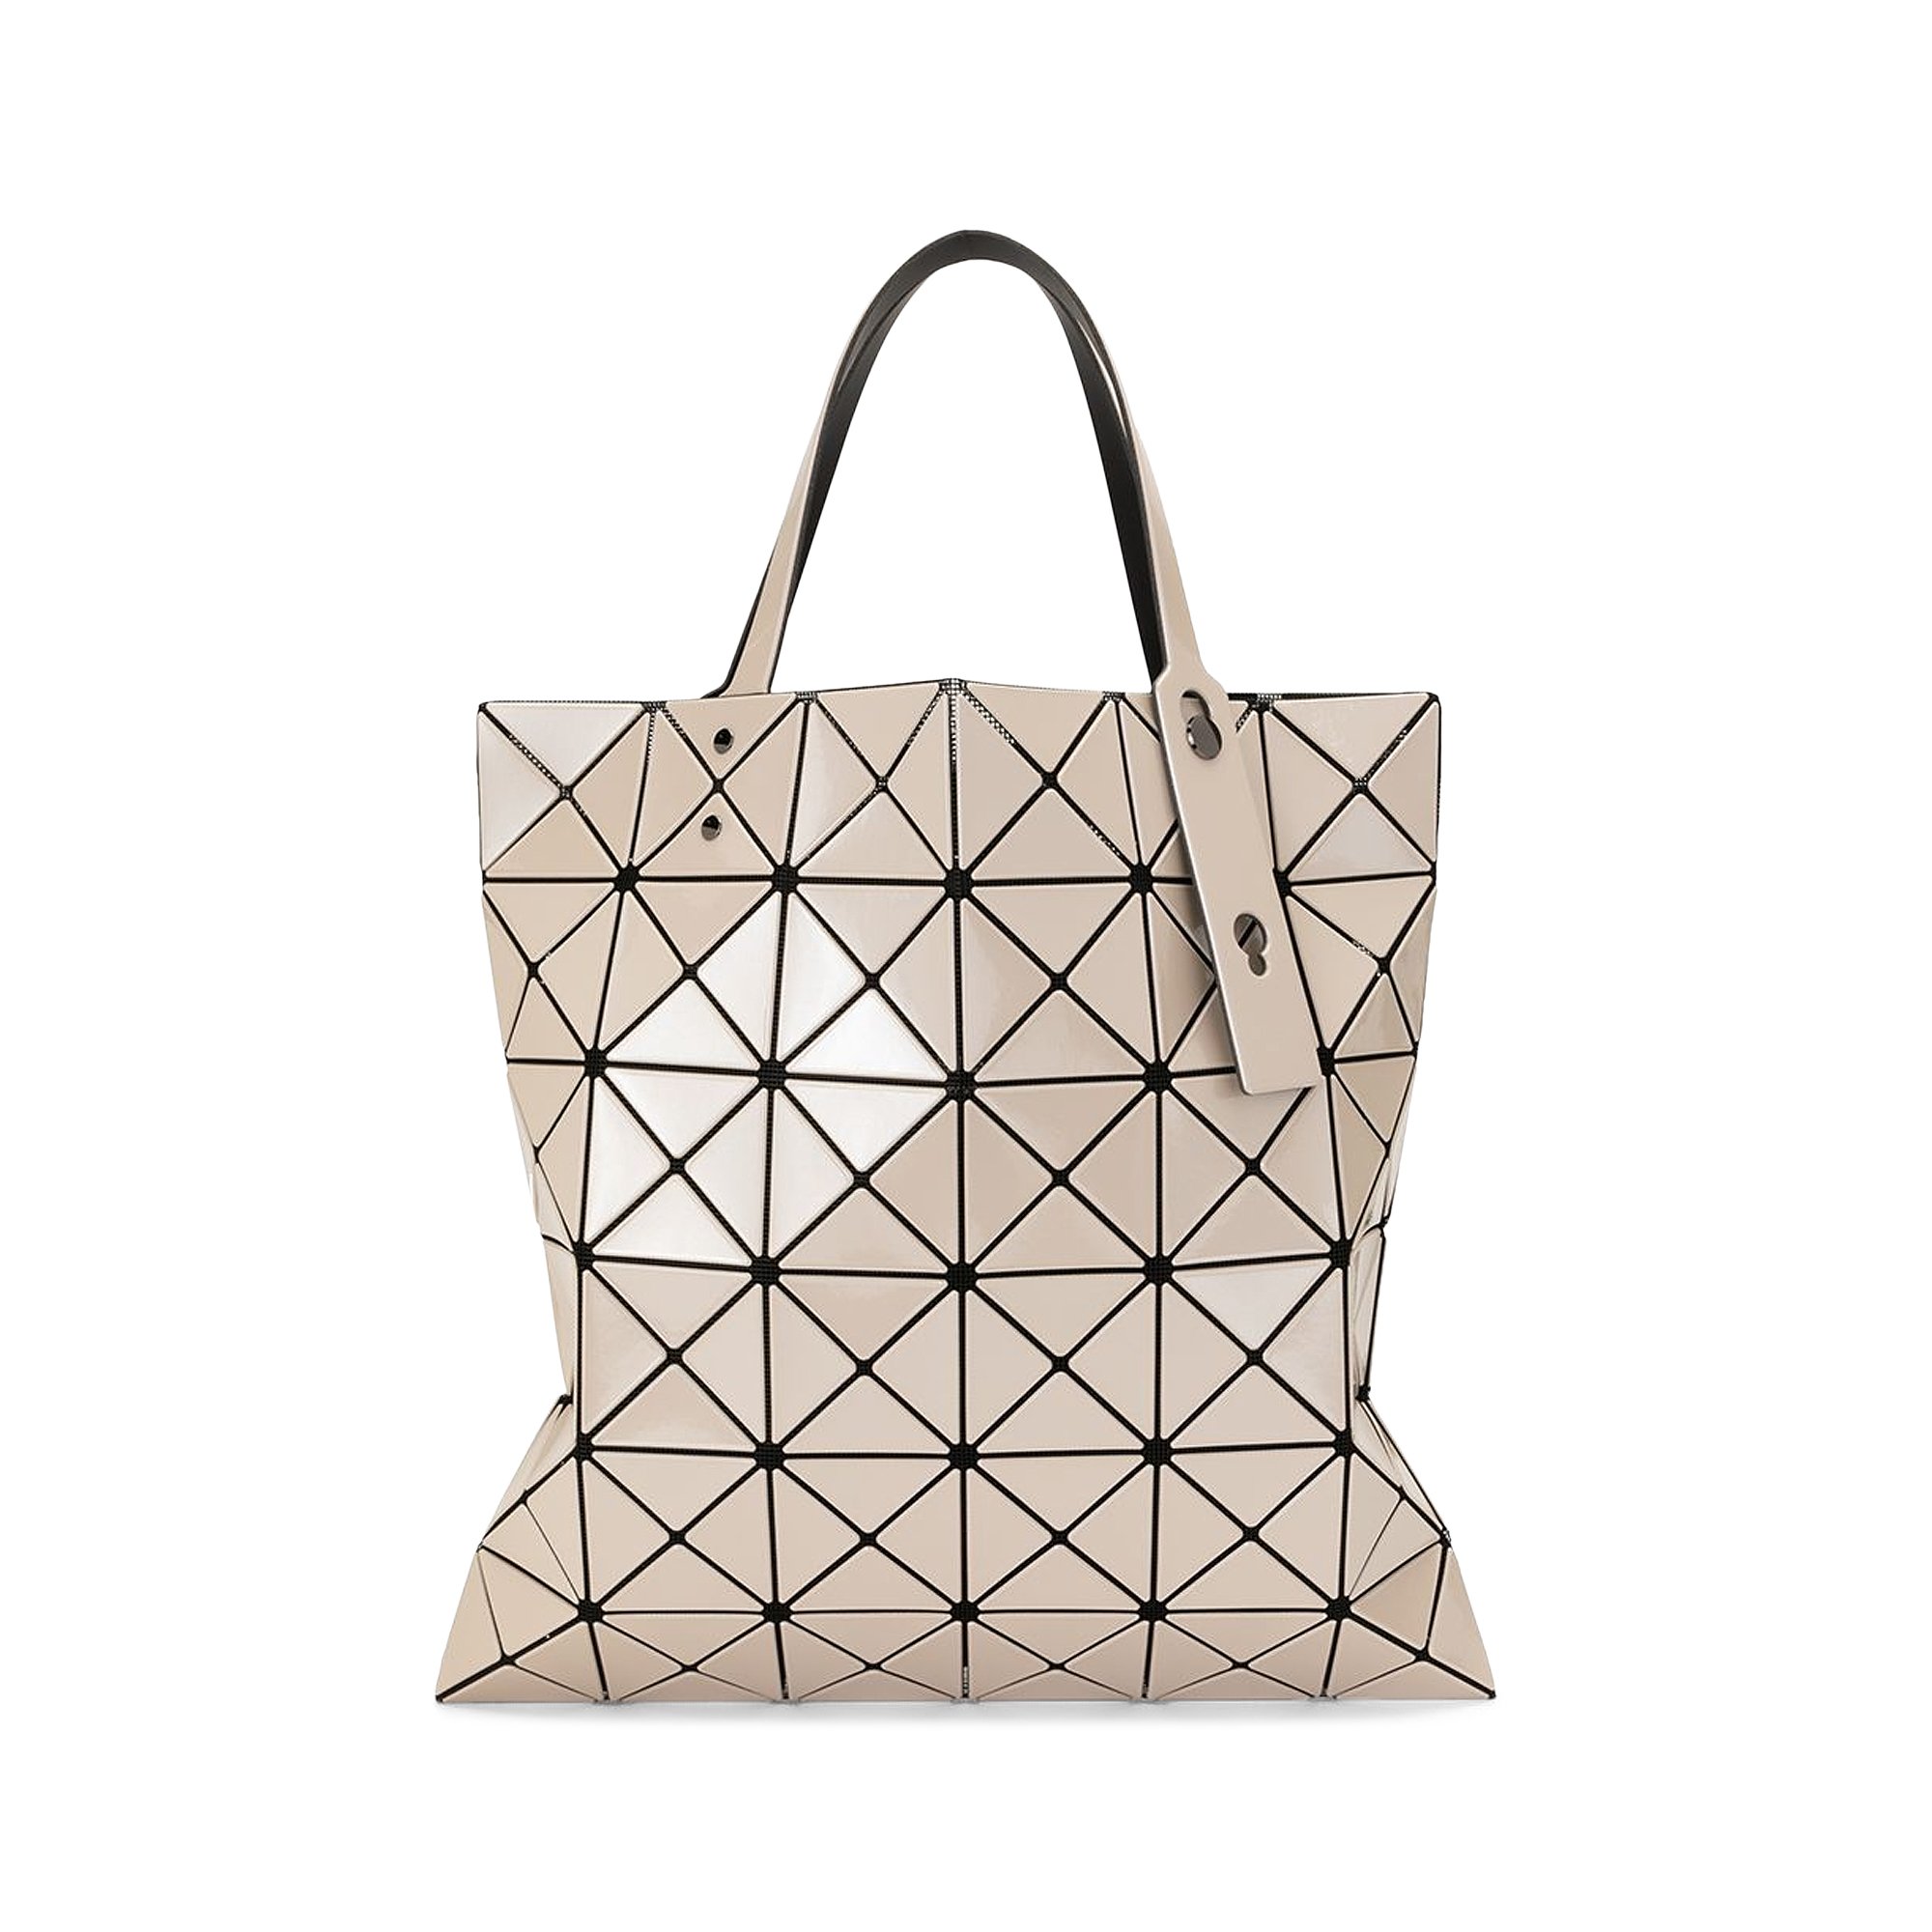 Buy Bao Bao Issey Miyake Large Lucent Tote 'Beige' - BB16AG053 40 